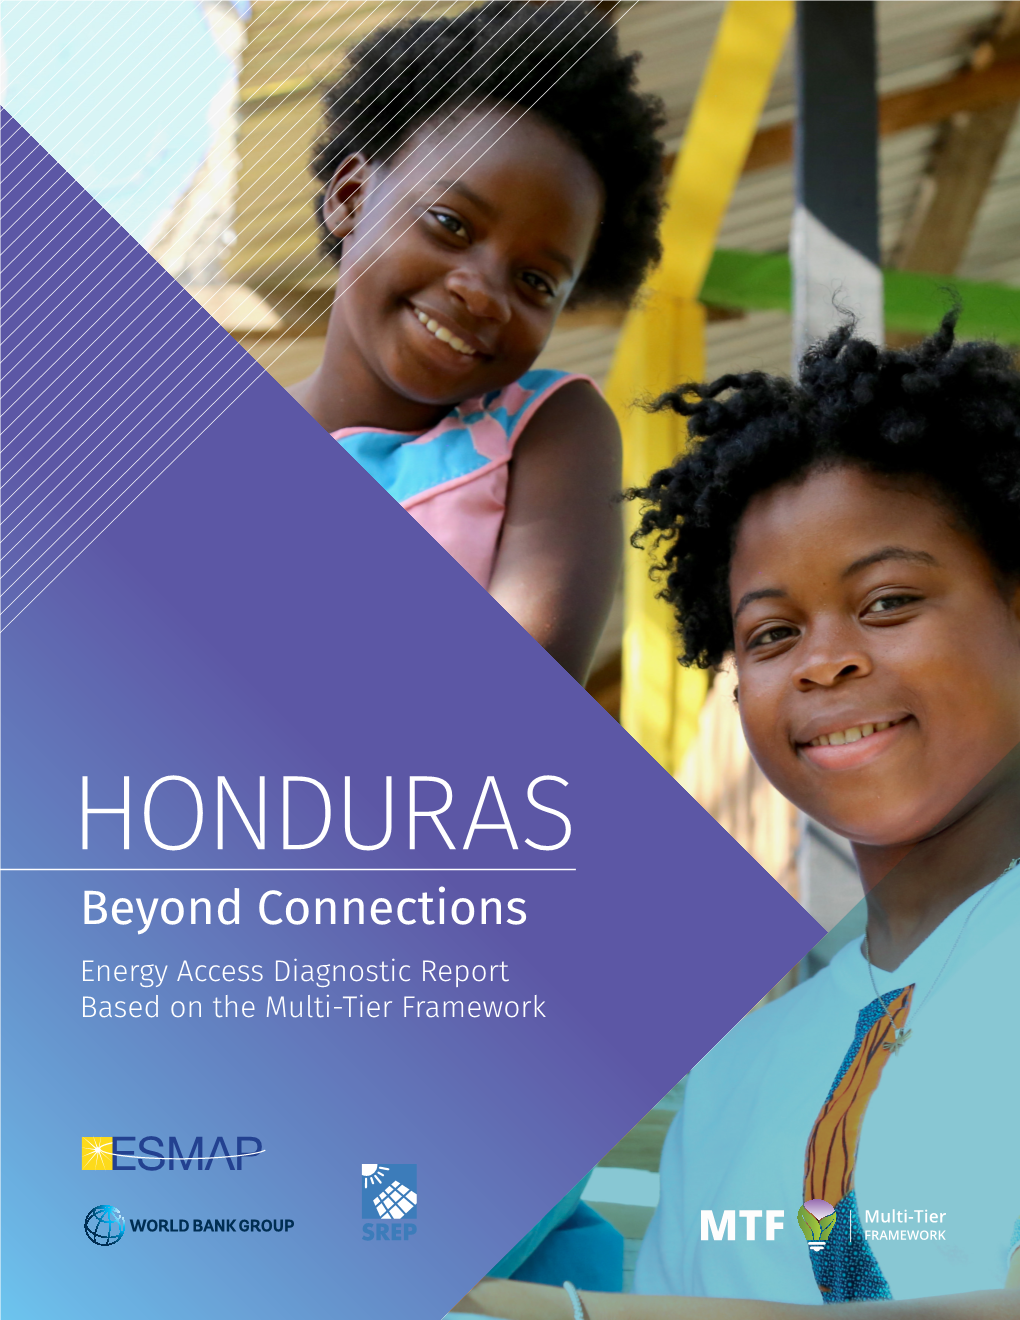 HONDURAS Beyond Connections Energy Access Diagnostic Report Based on the Multi-Tier Framework